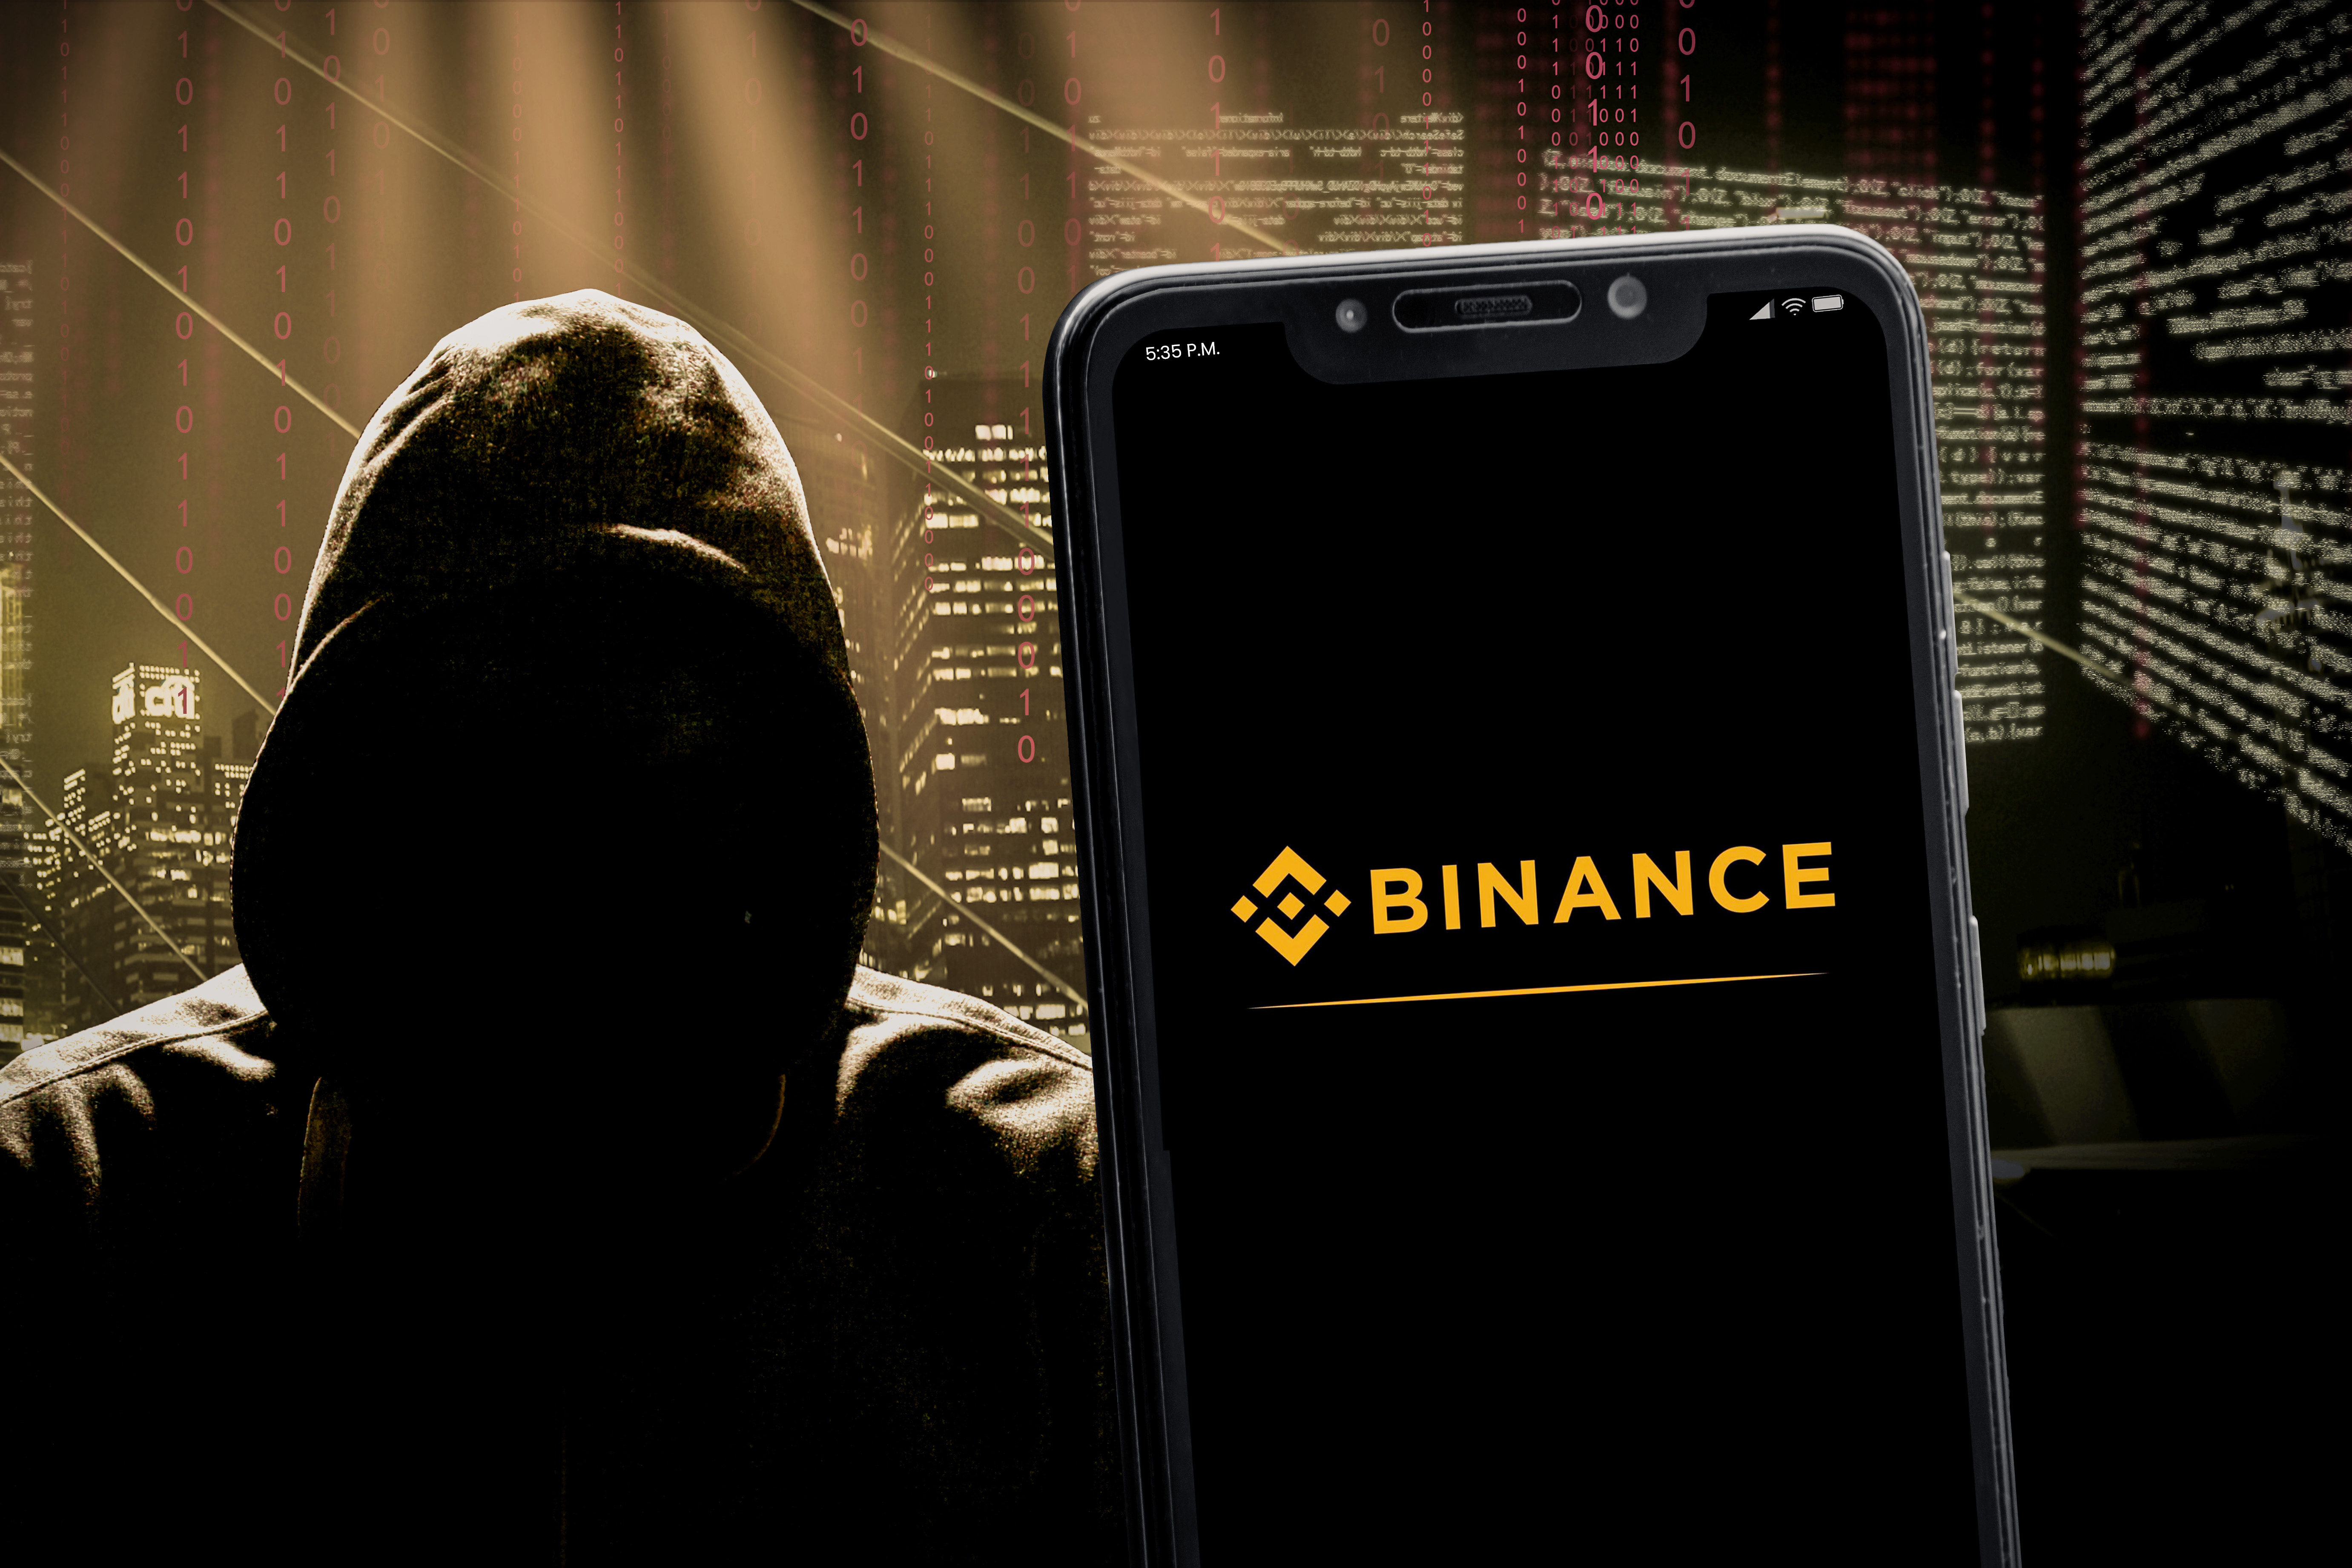 BNB Chain, the blockchain of Binance, targeted by a hack of 566 million dollars